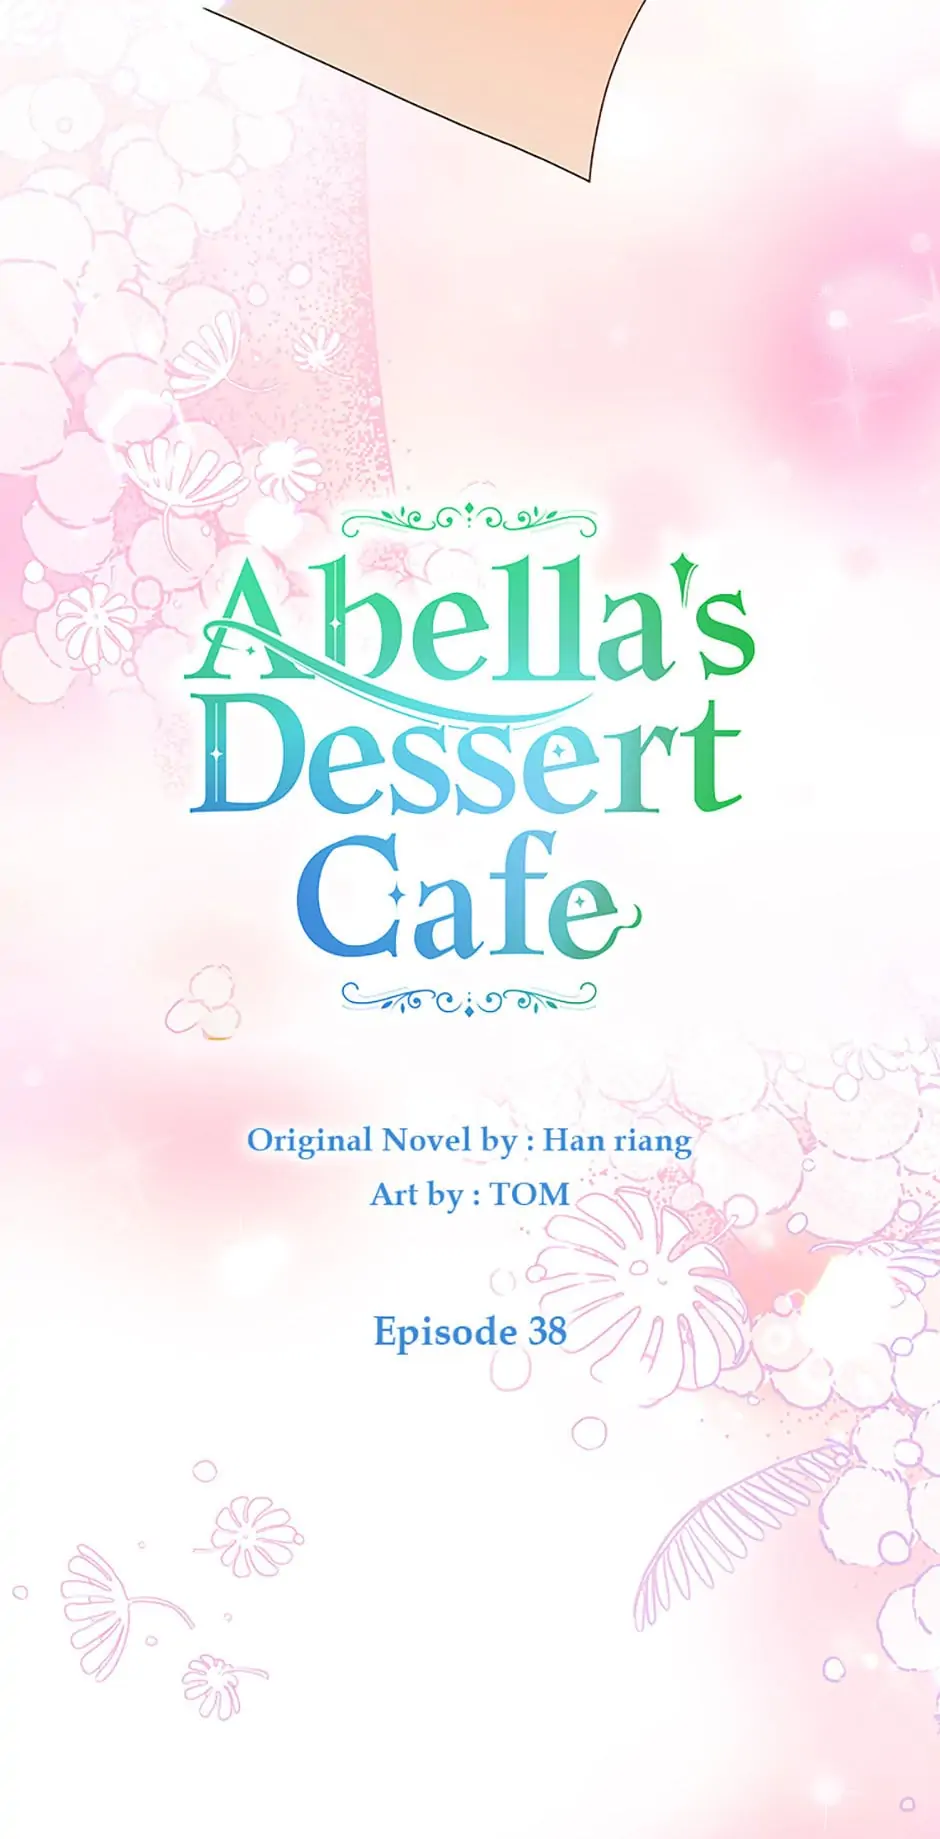 She came back and opened a dessert shop chapter 38